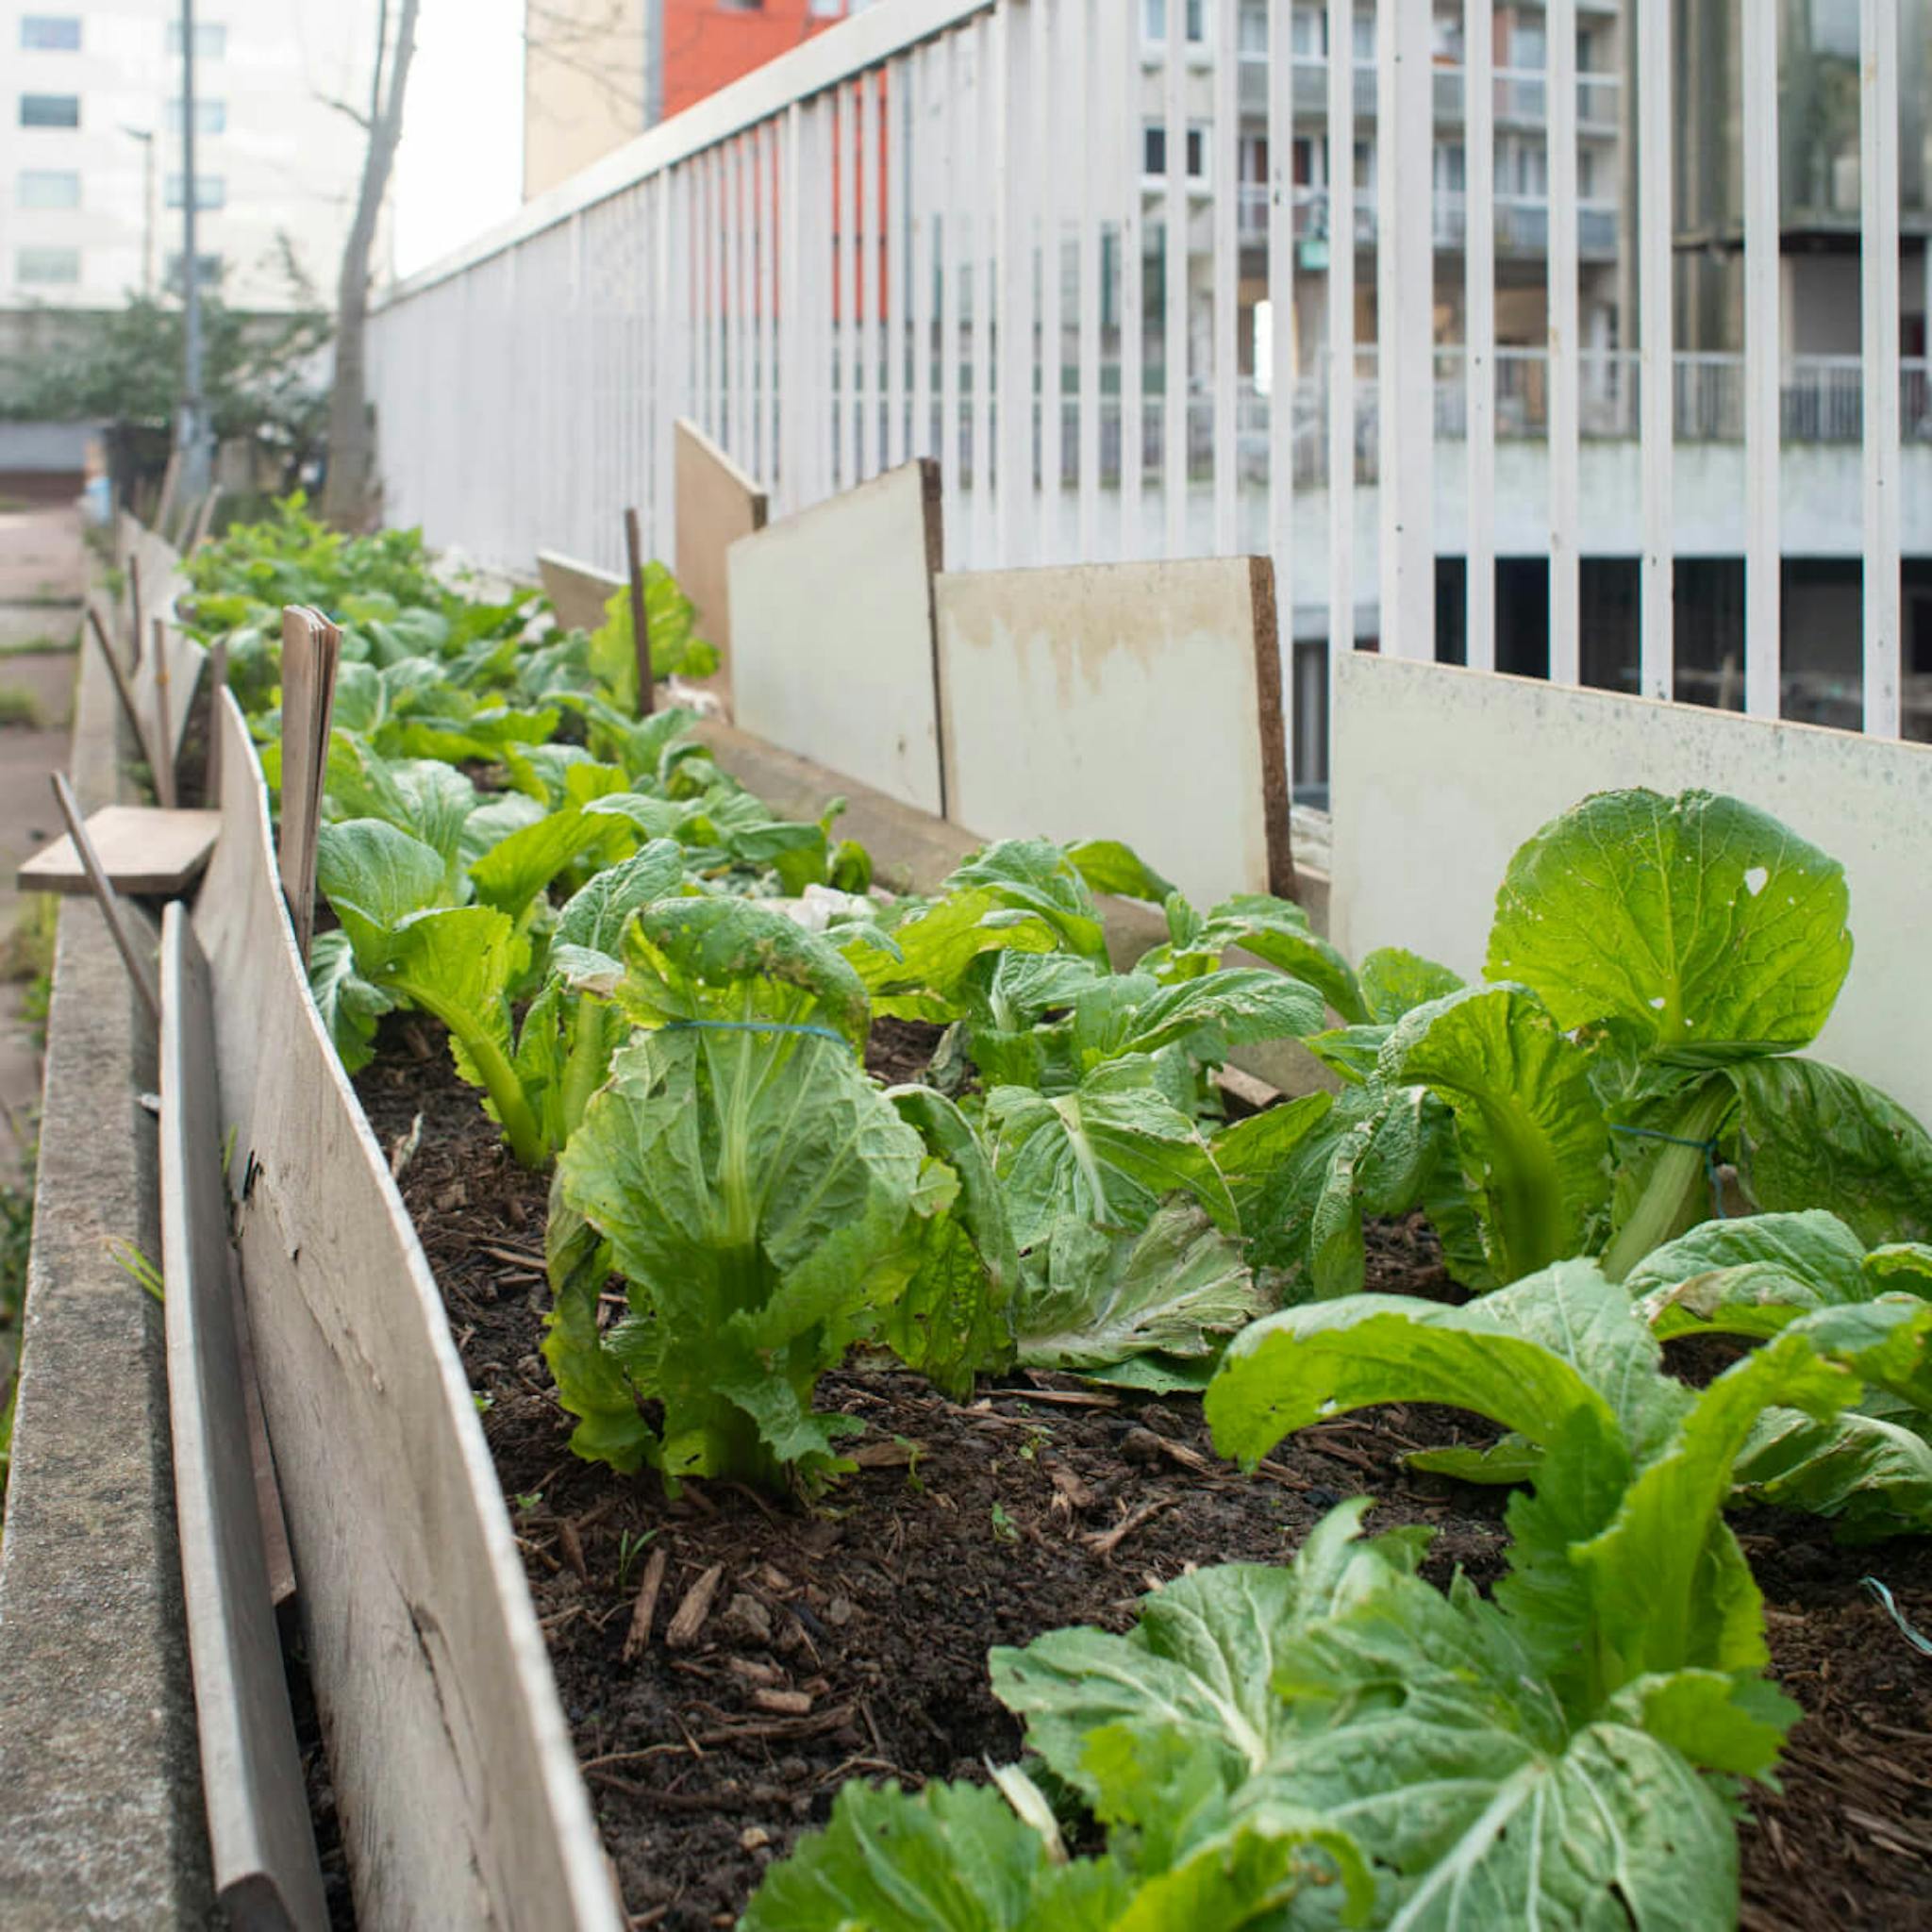 A community garden with a row of lush, green lettuce plants growing in a wooden raised bed.